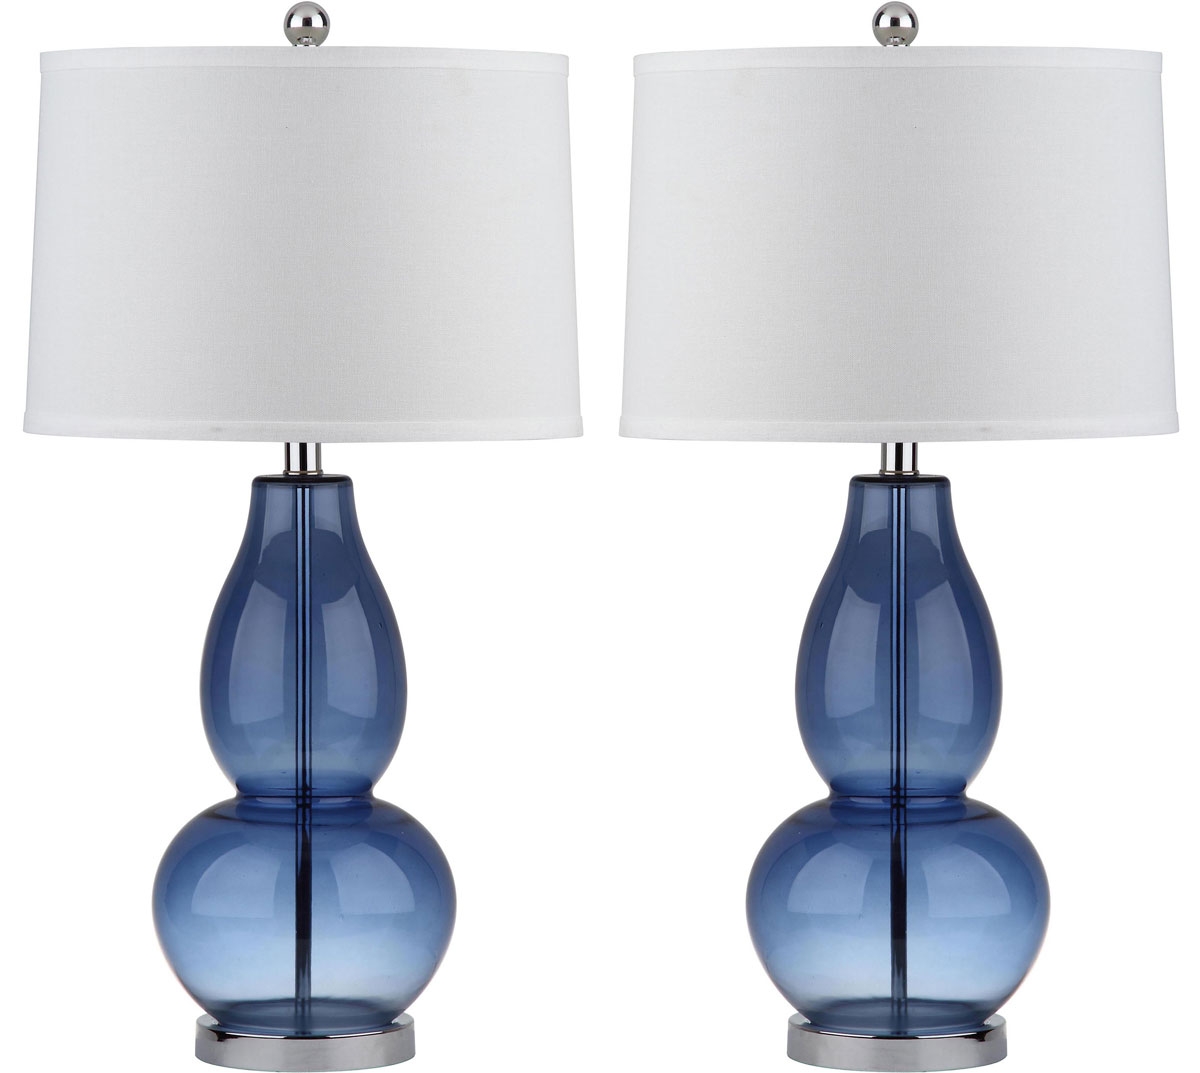 Mercurio 28.5-Inch H Double Gourd Table Lamp - Blue - Arlo Home - Image 1